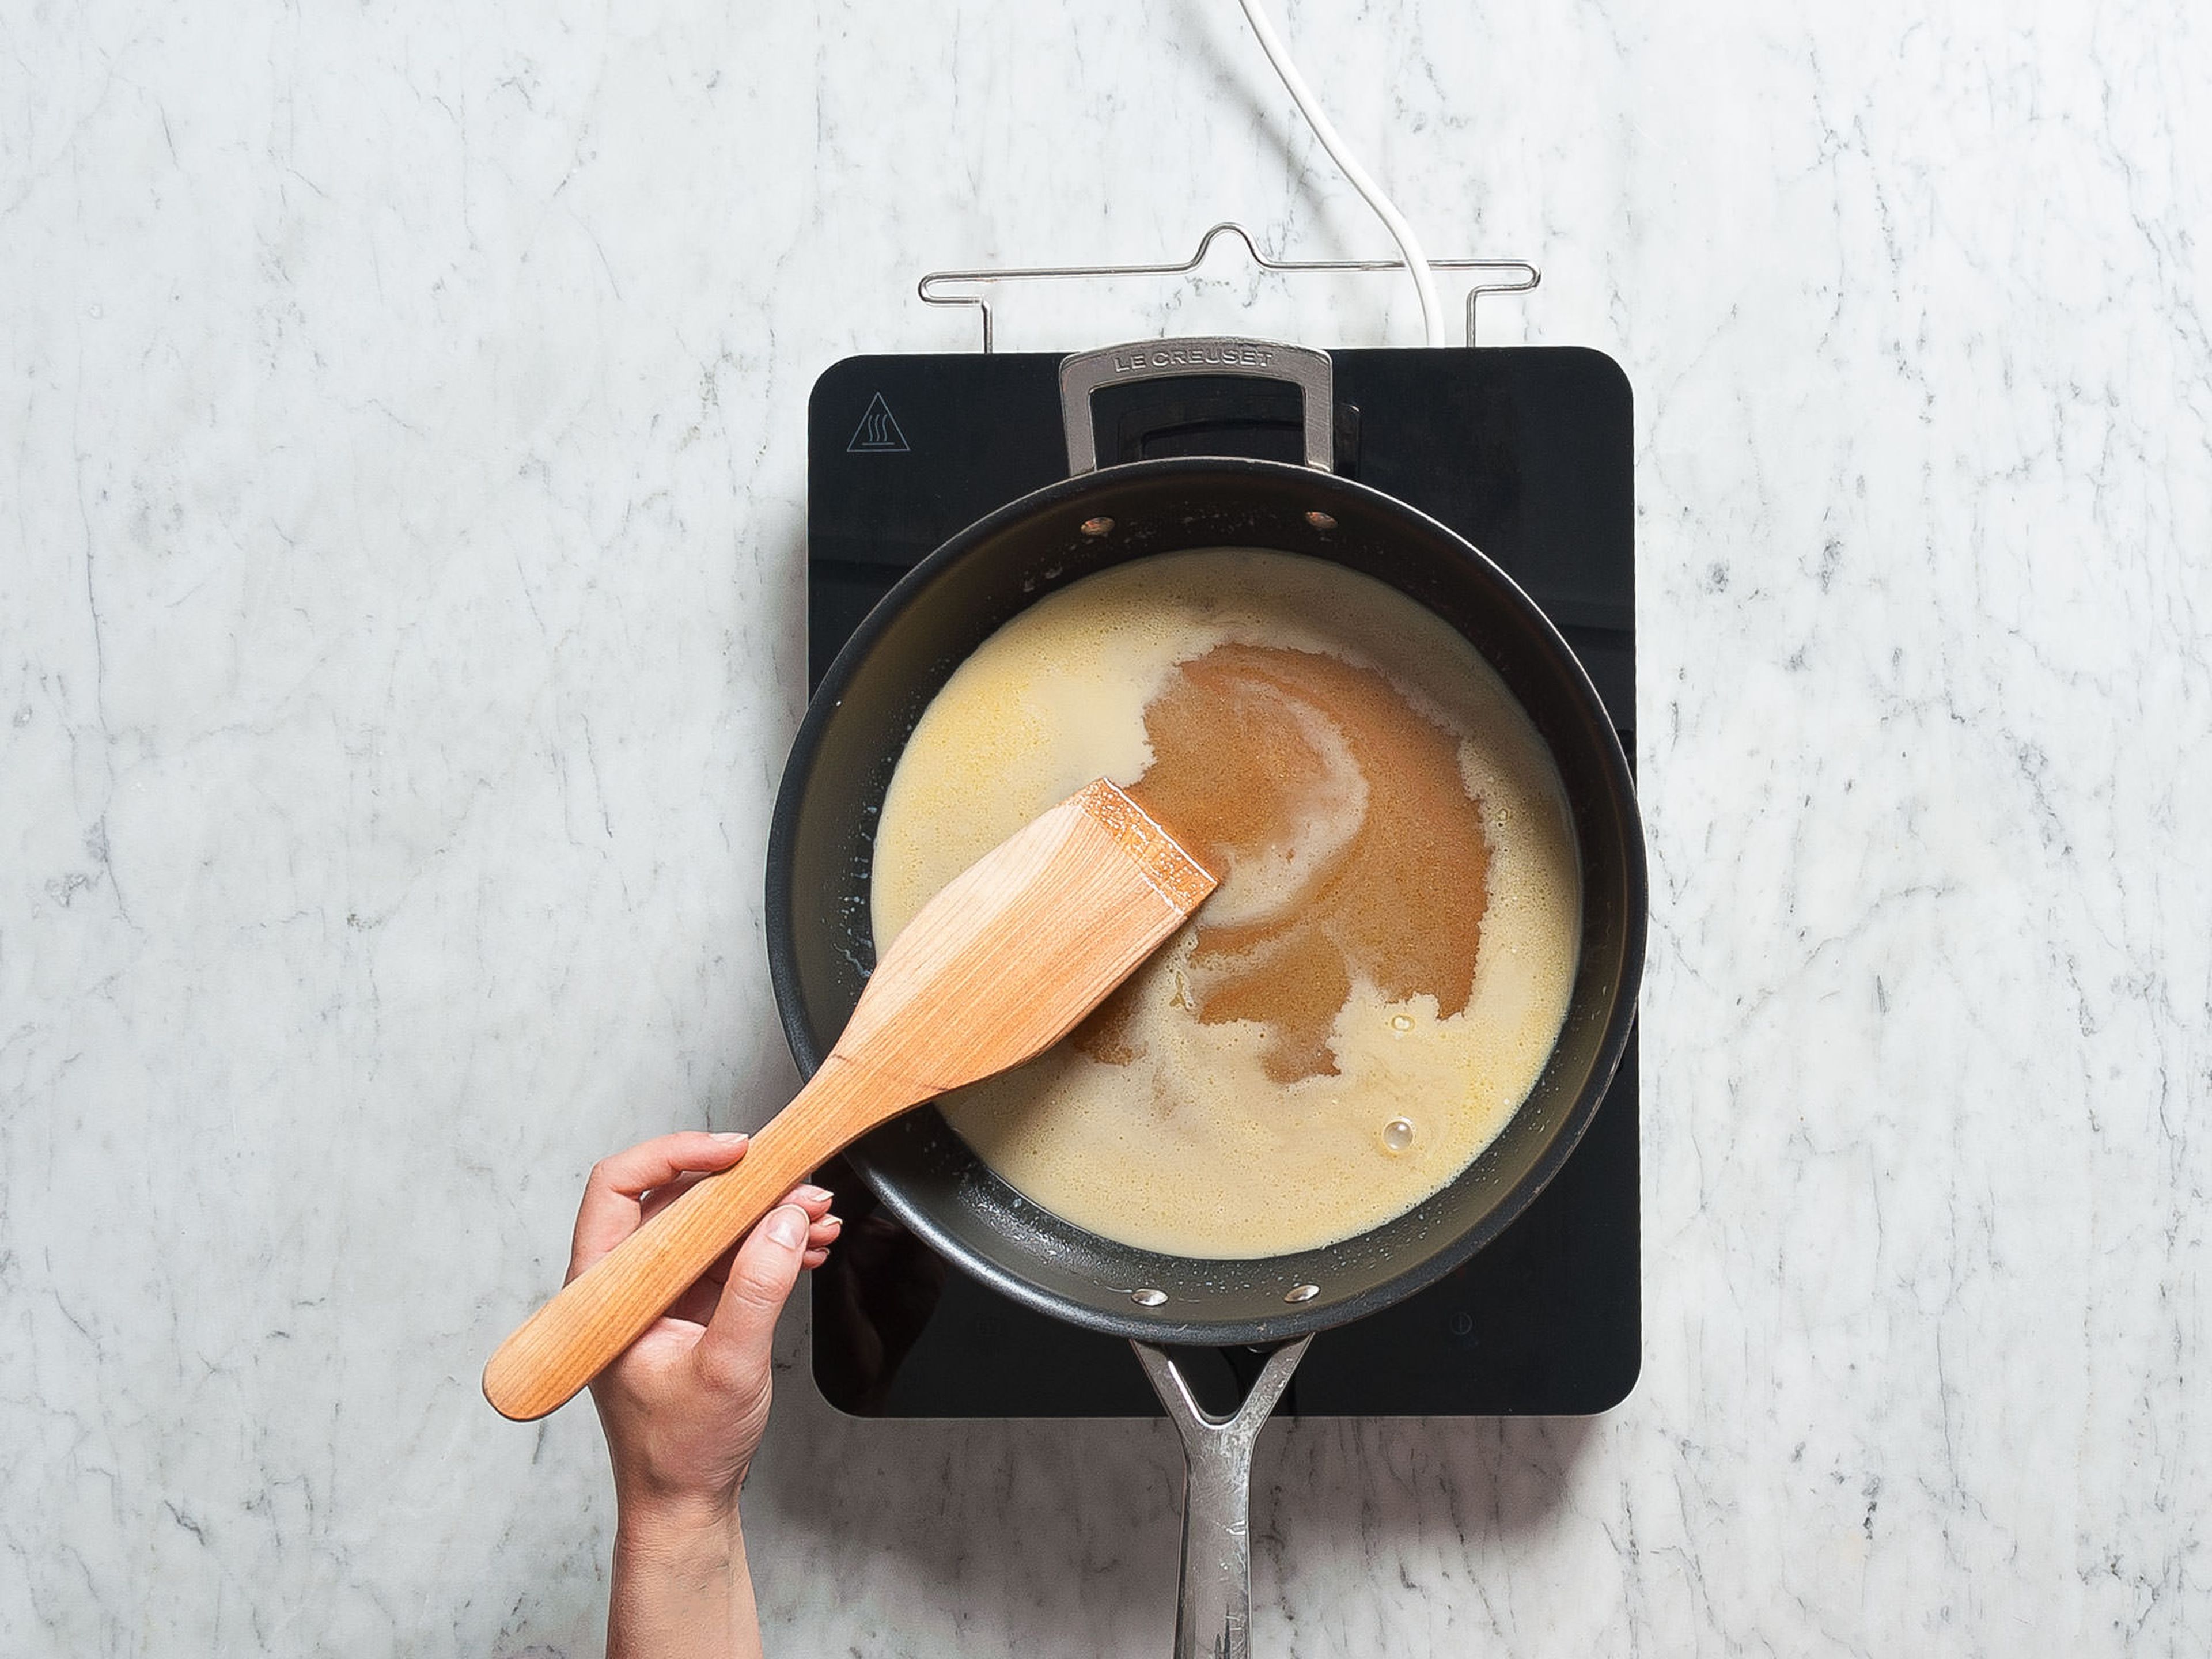 Add cane sugar, sugar, heavy cream, and vanilla extract to a nonstick pan set over medium heat and cook until sugar dissolves. Reduce heat and continue to simmer on low heat for approx. 15 min., without stirring. Add cold butter and swirl pan until butter is melted; don’t stir.